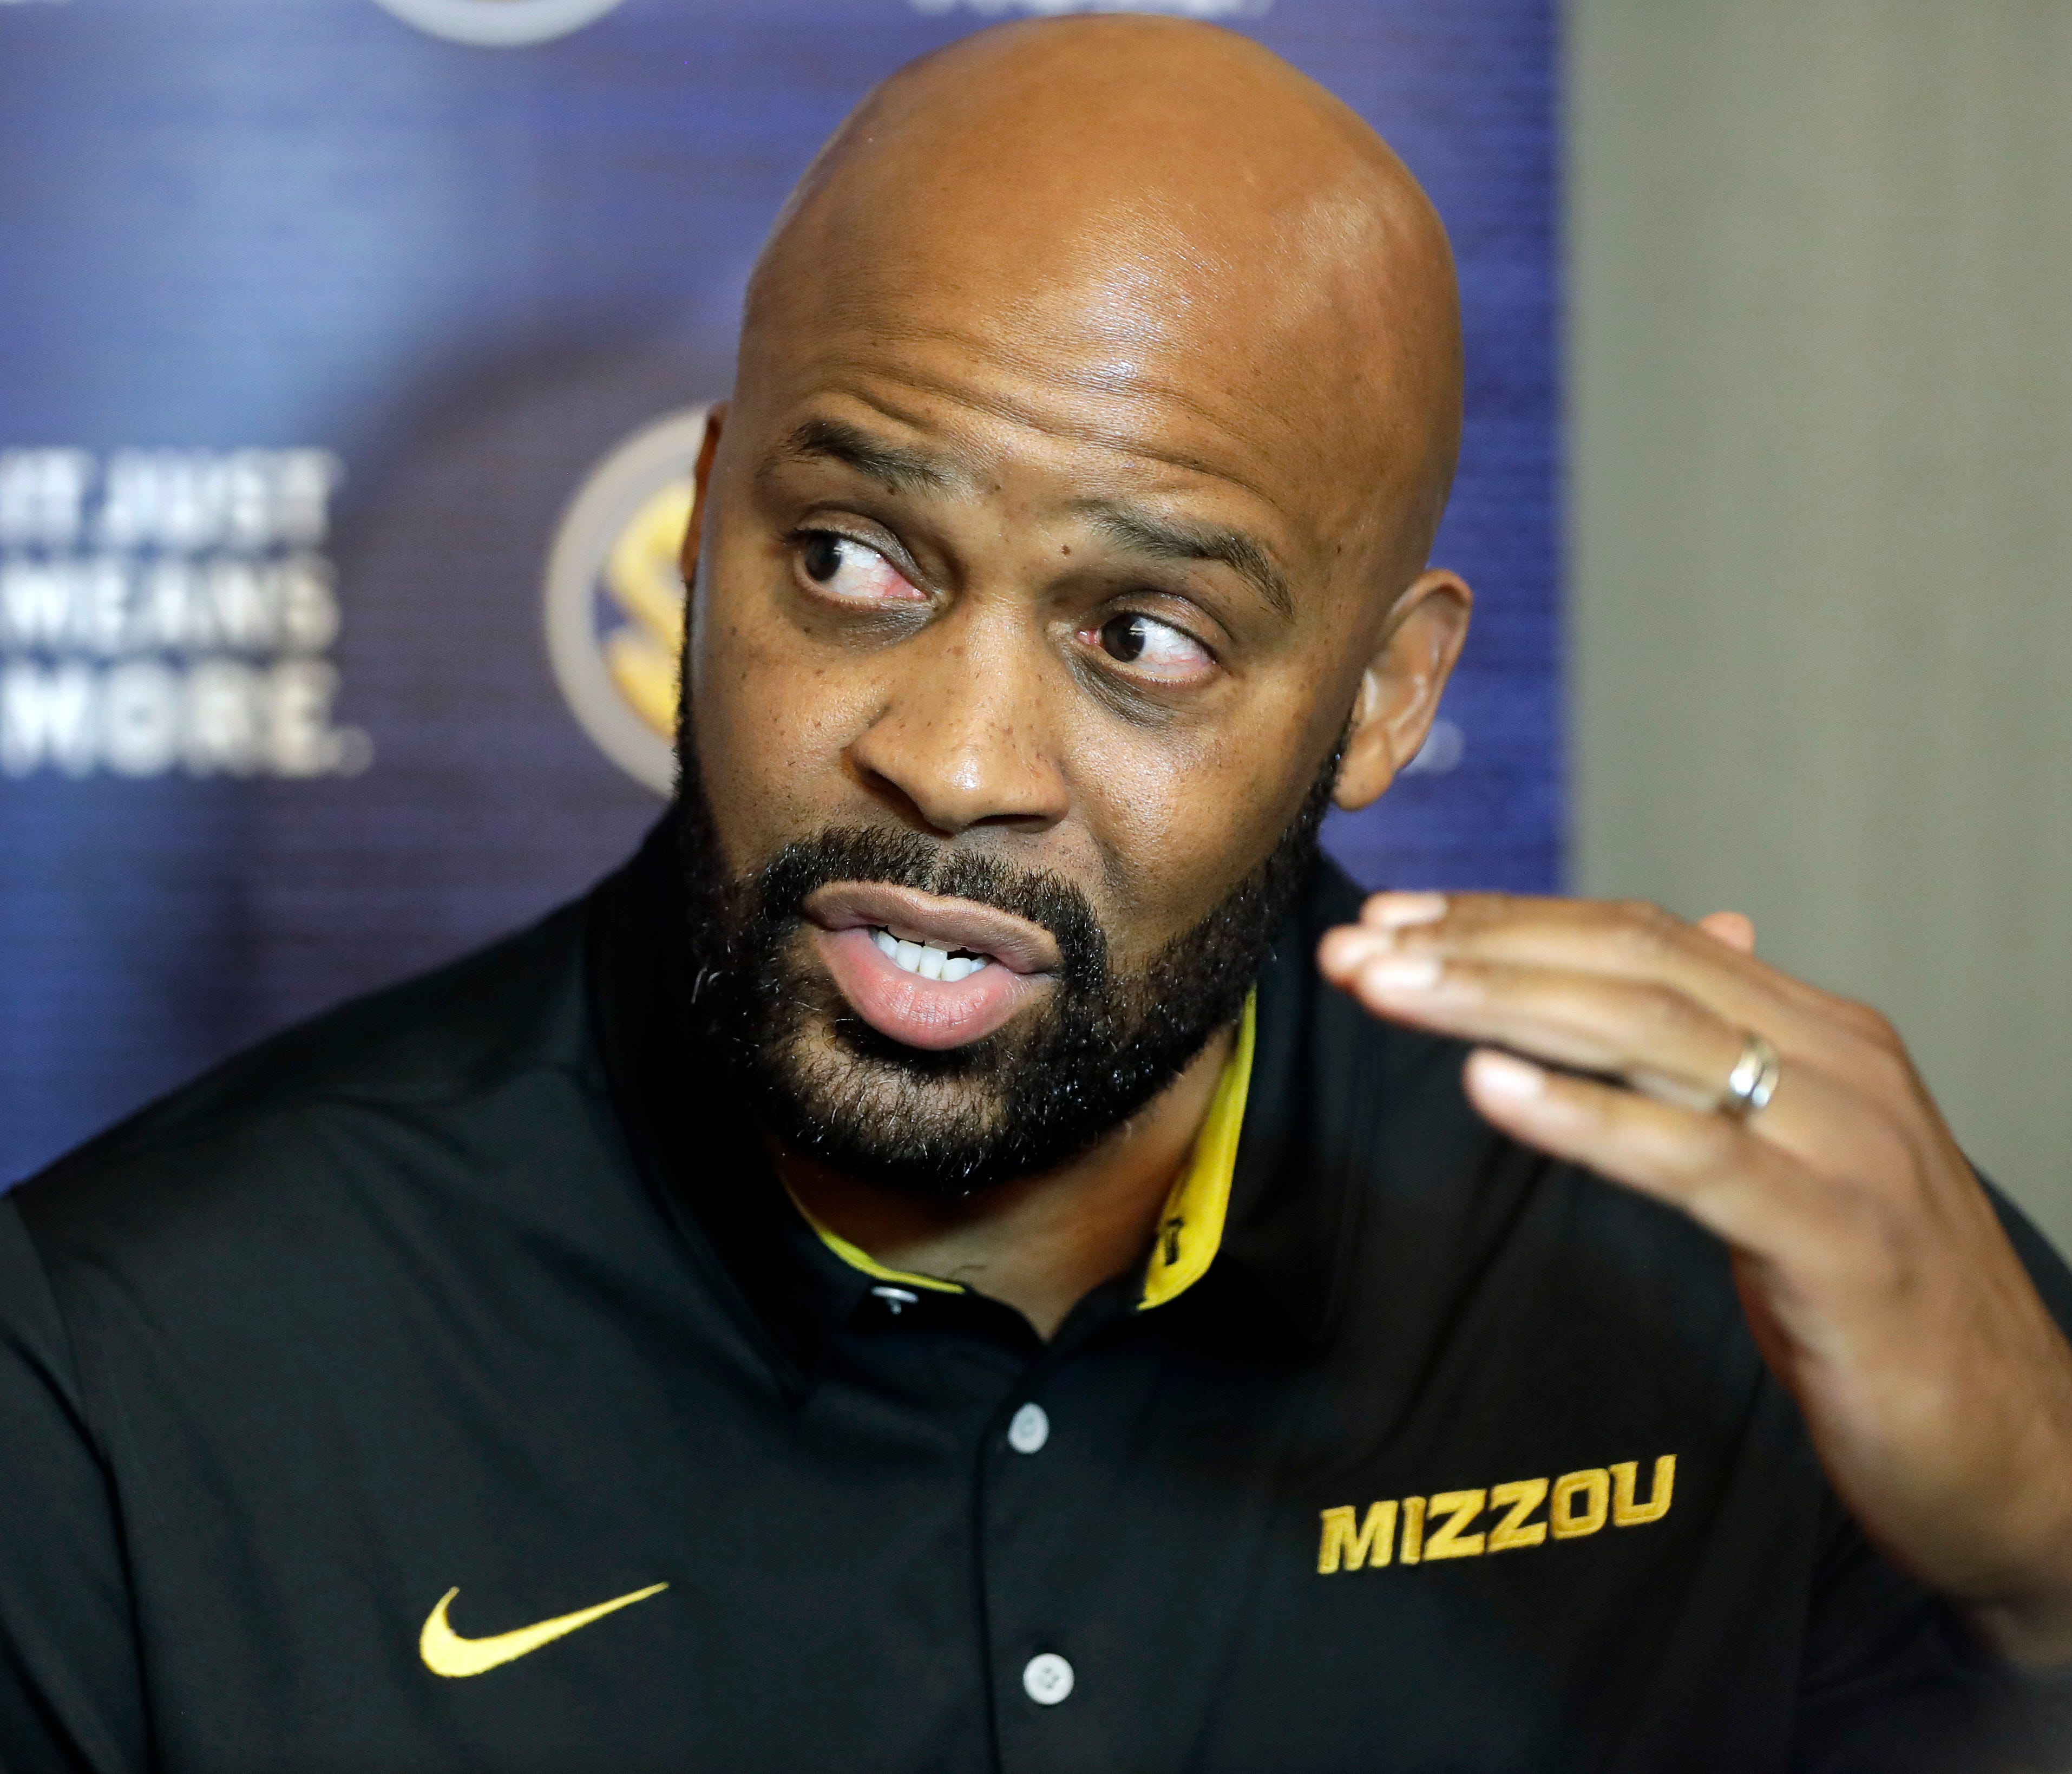 FILE - In this Oct. 18, 2017, file photo, Missouri head coach Cuonzo Martin answers questions during the Southeastern Conference men's NCAA college basketball media day in Nashville, Tenn. Missouri has been largely an afterthought in the SEC over the